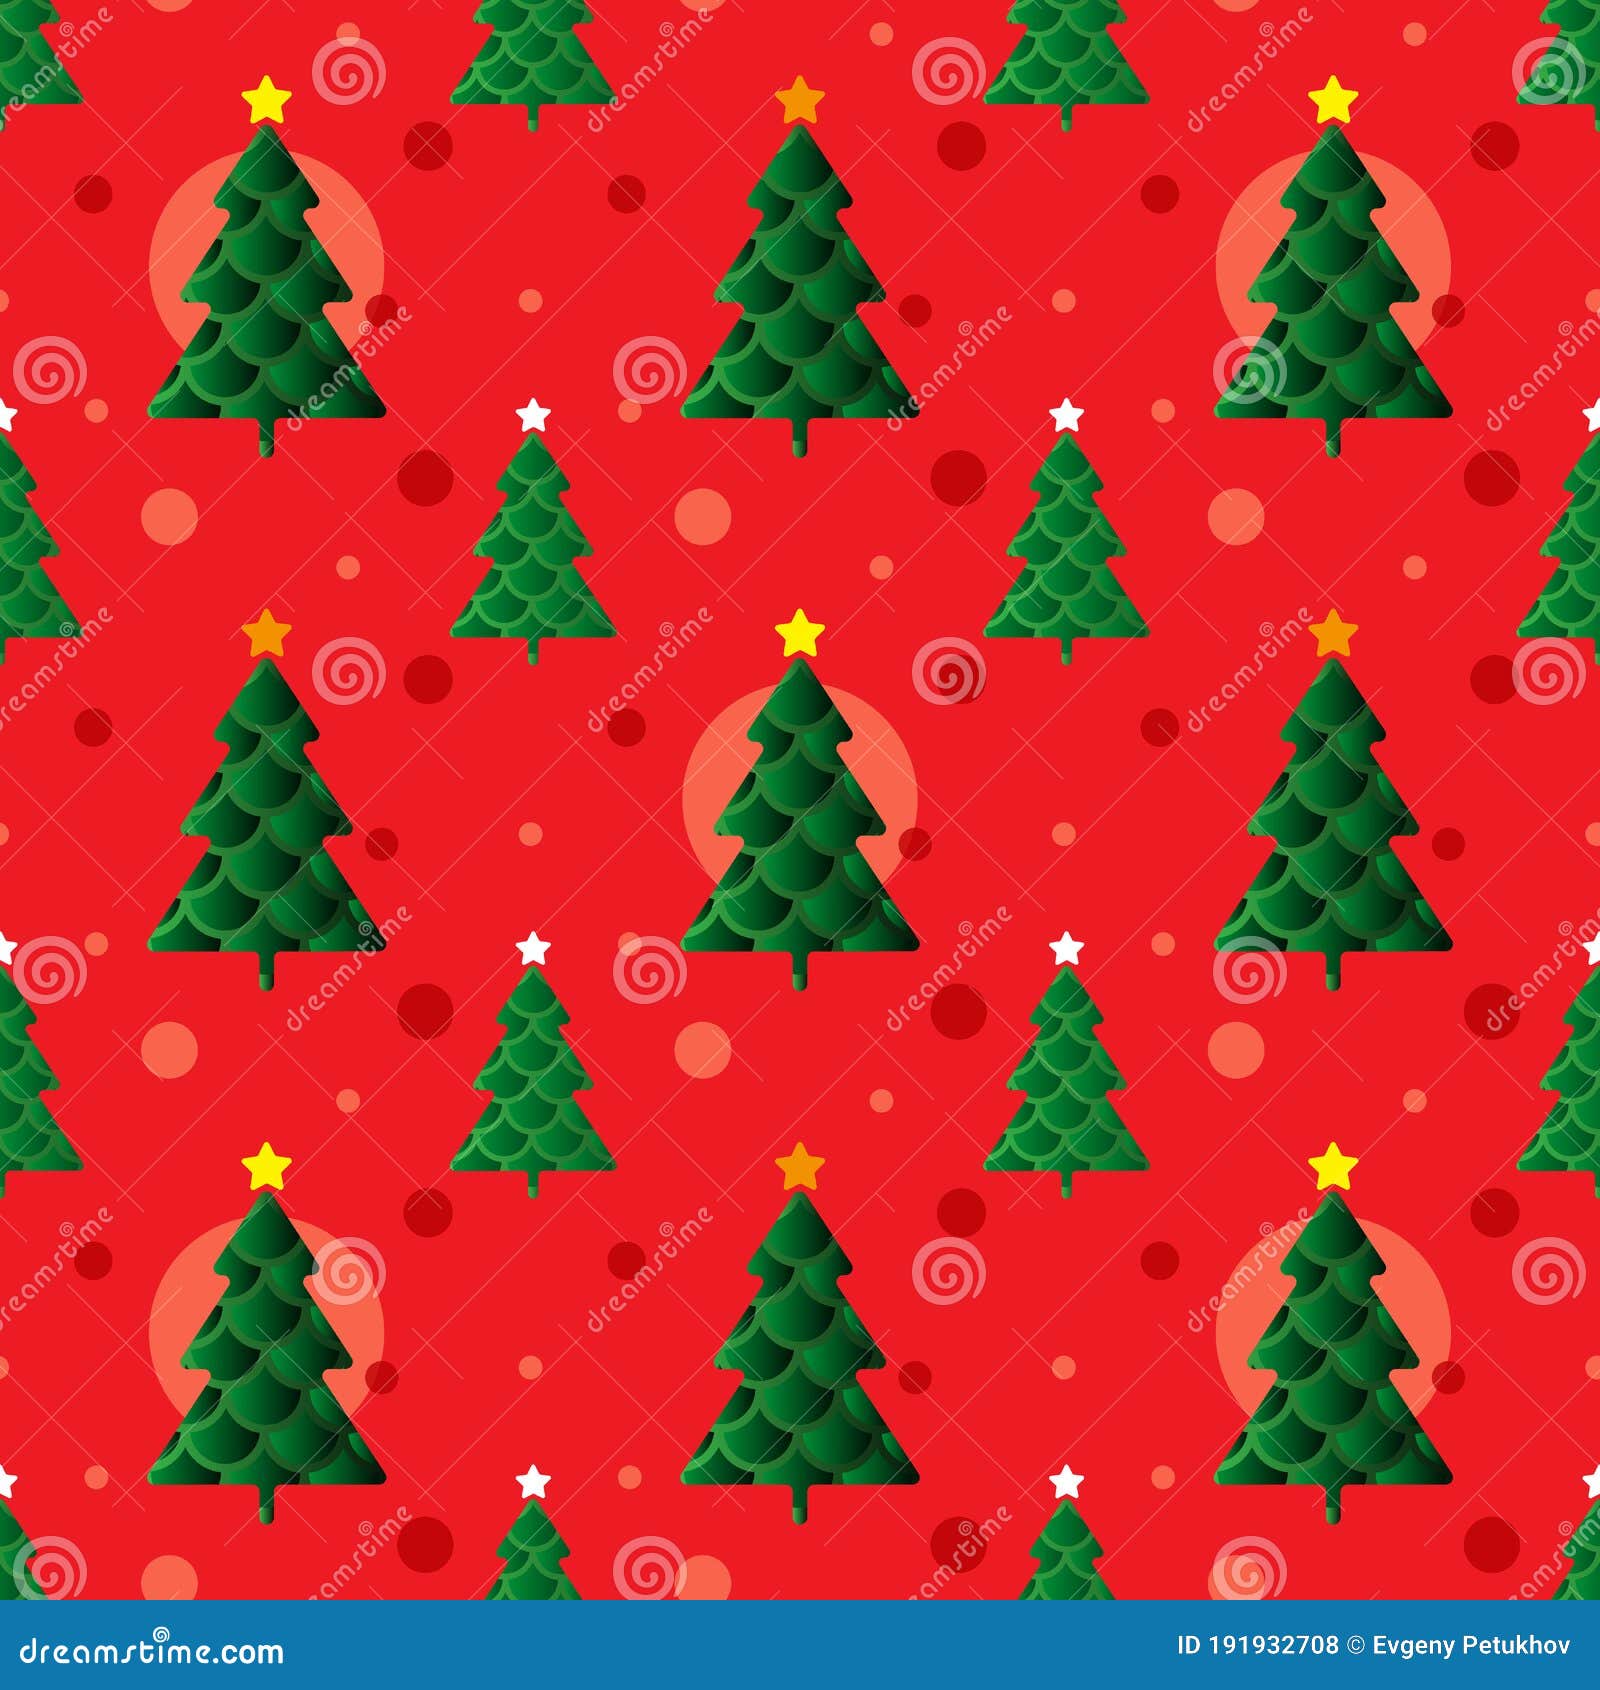 Seamless Christmas Background with Green Christmas Trees on a Red Background.  Design for Paper, Textile and Wallpaper Stock Vector - Illustration of  background, design: 191932708